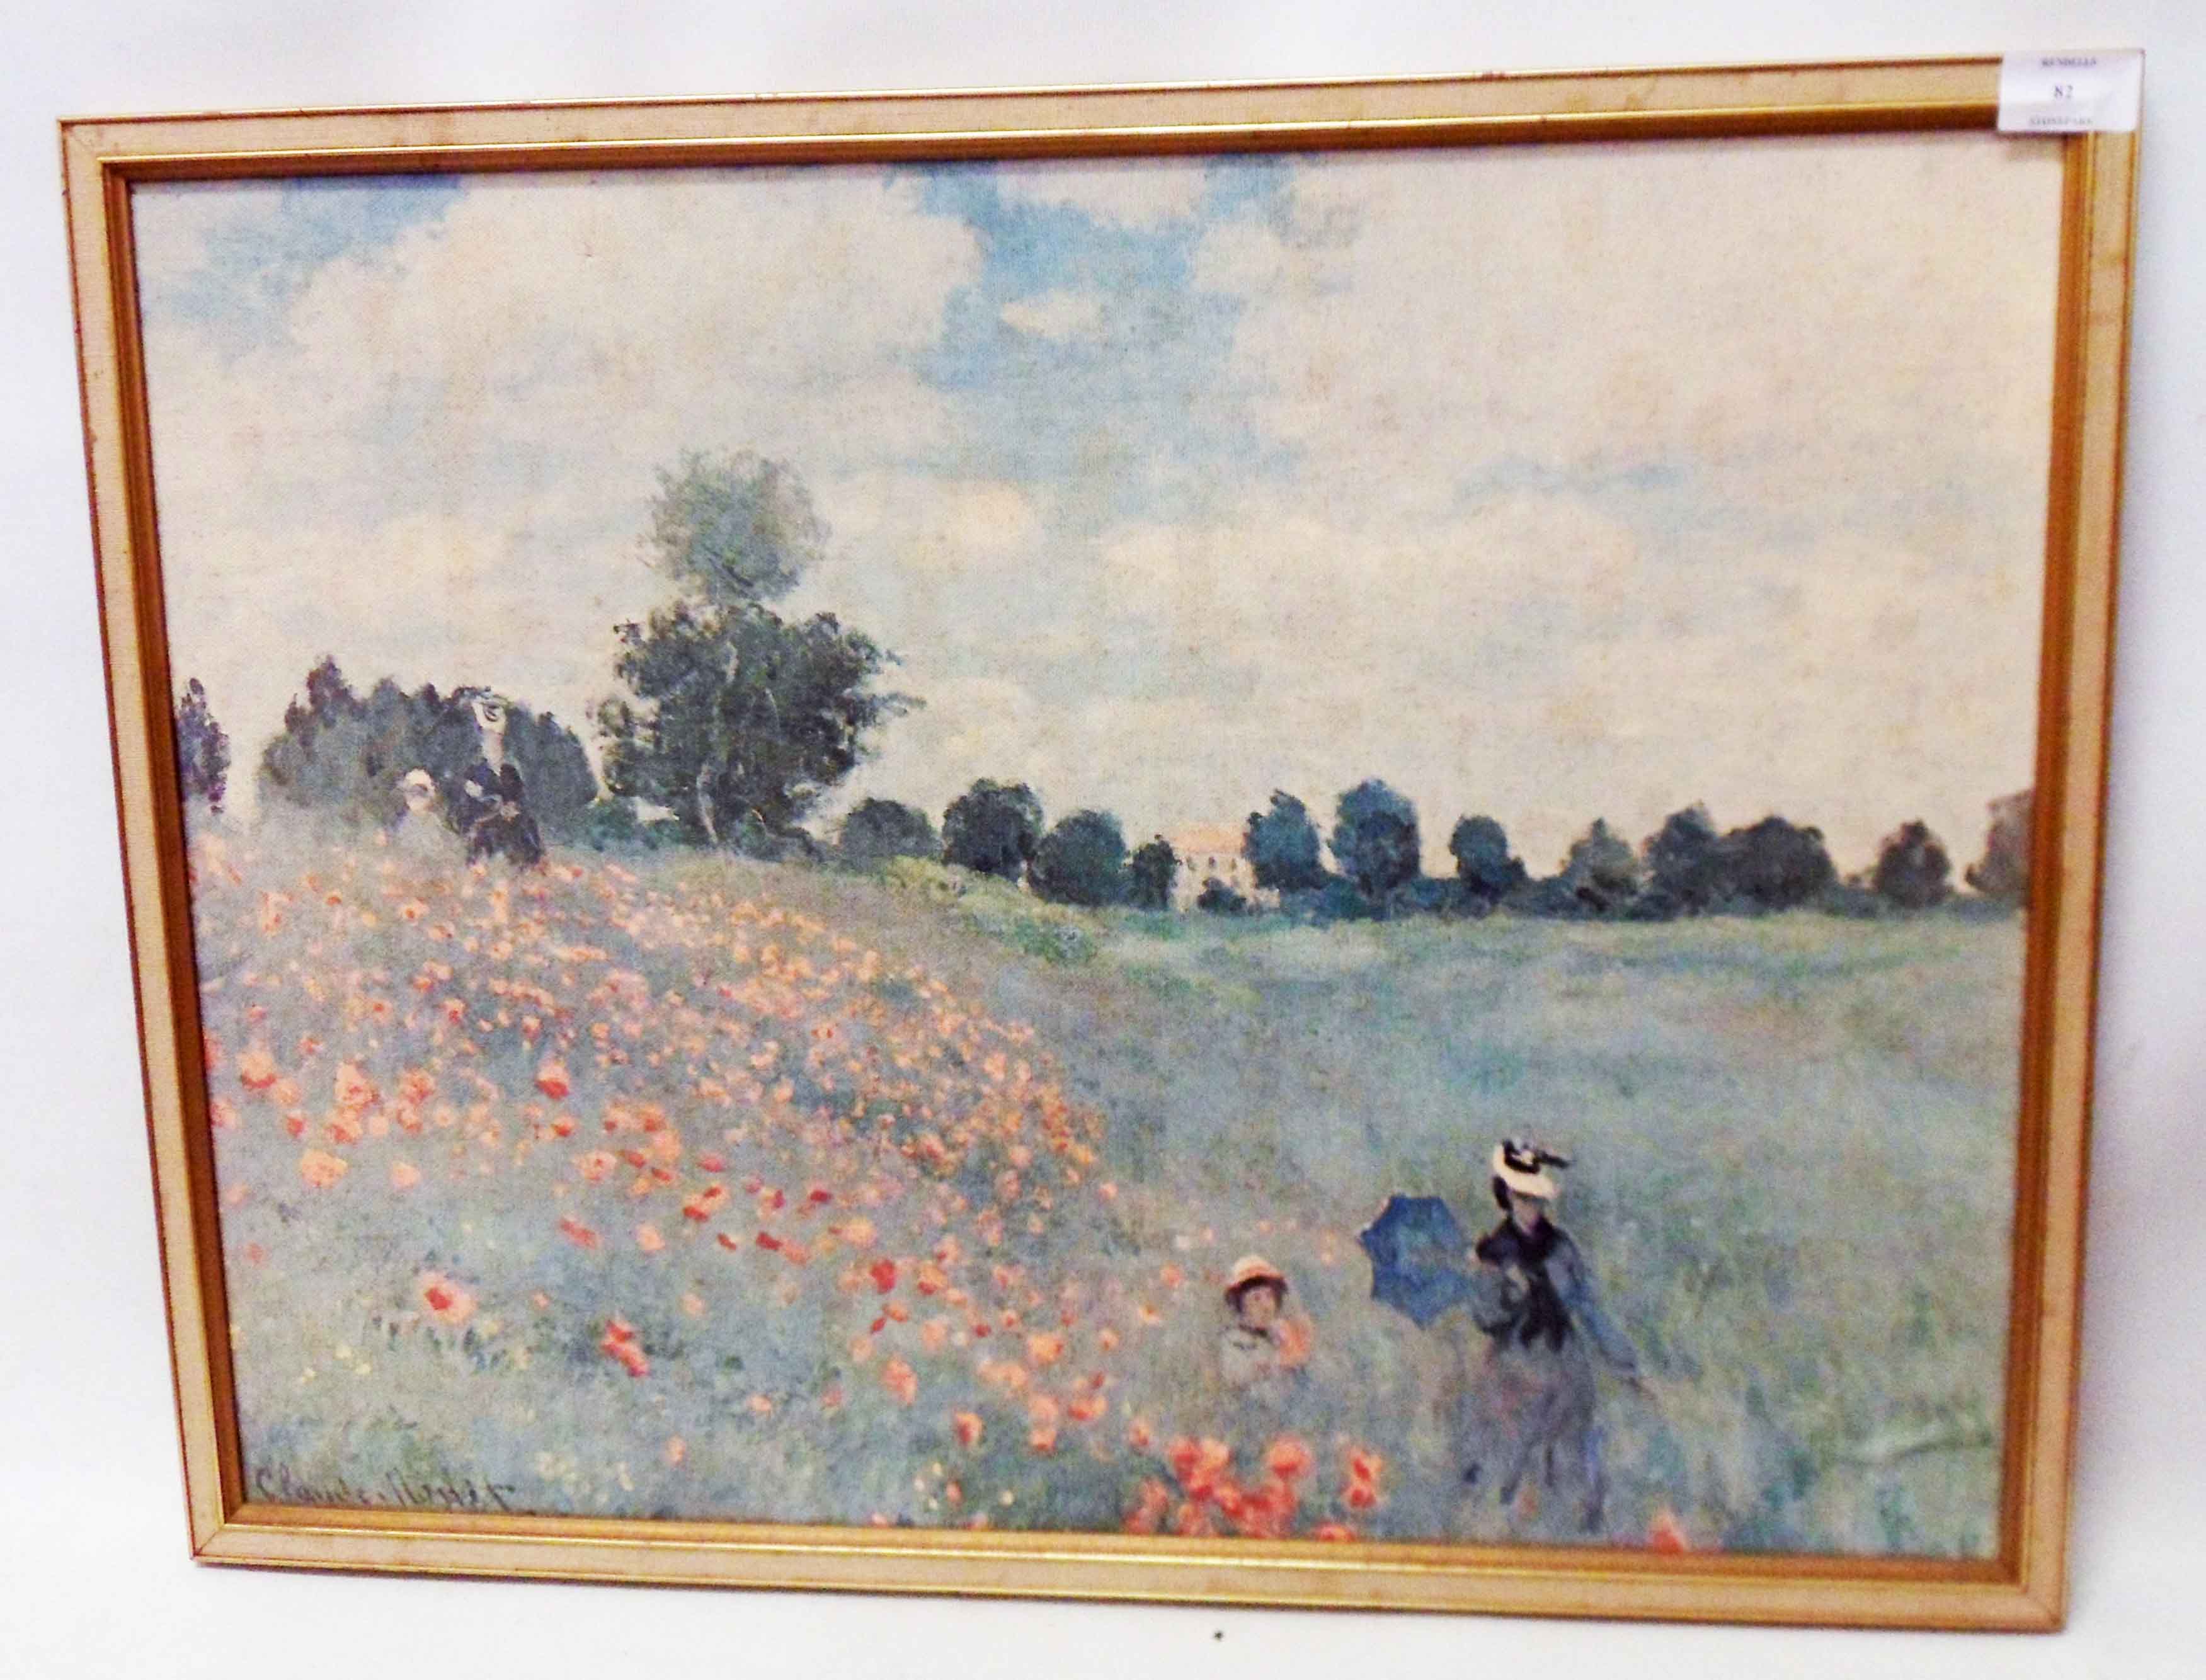 After Claude Monet: a framed print on canvas, depicting figures in a poppy field - slight canvas